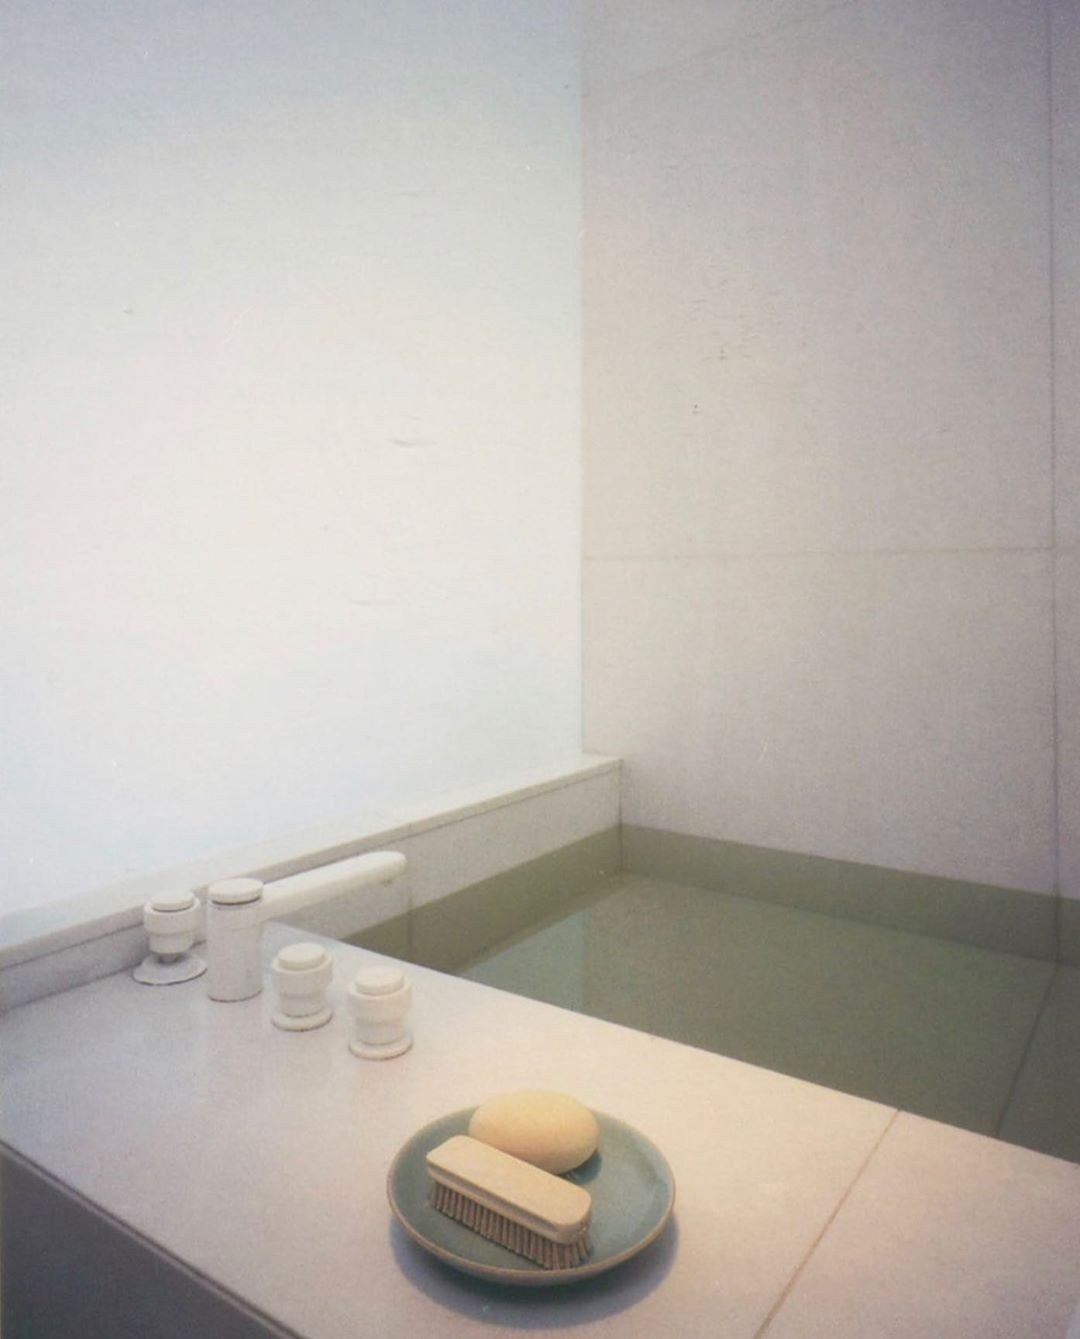 Bathtub in a New York apartment designed by Michelle Gabellini Architects, 1989 